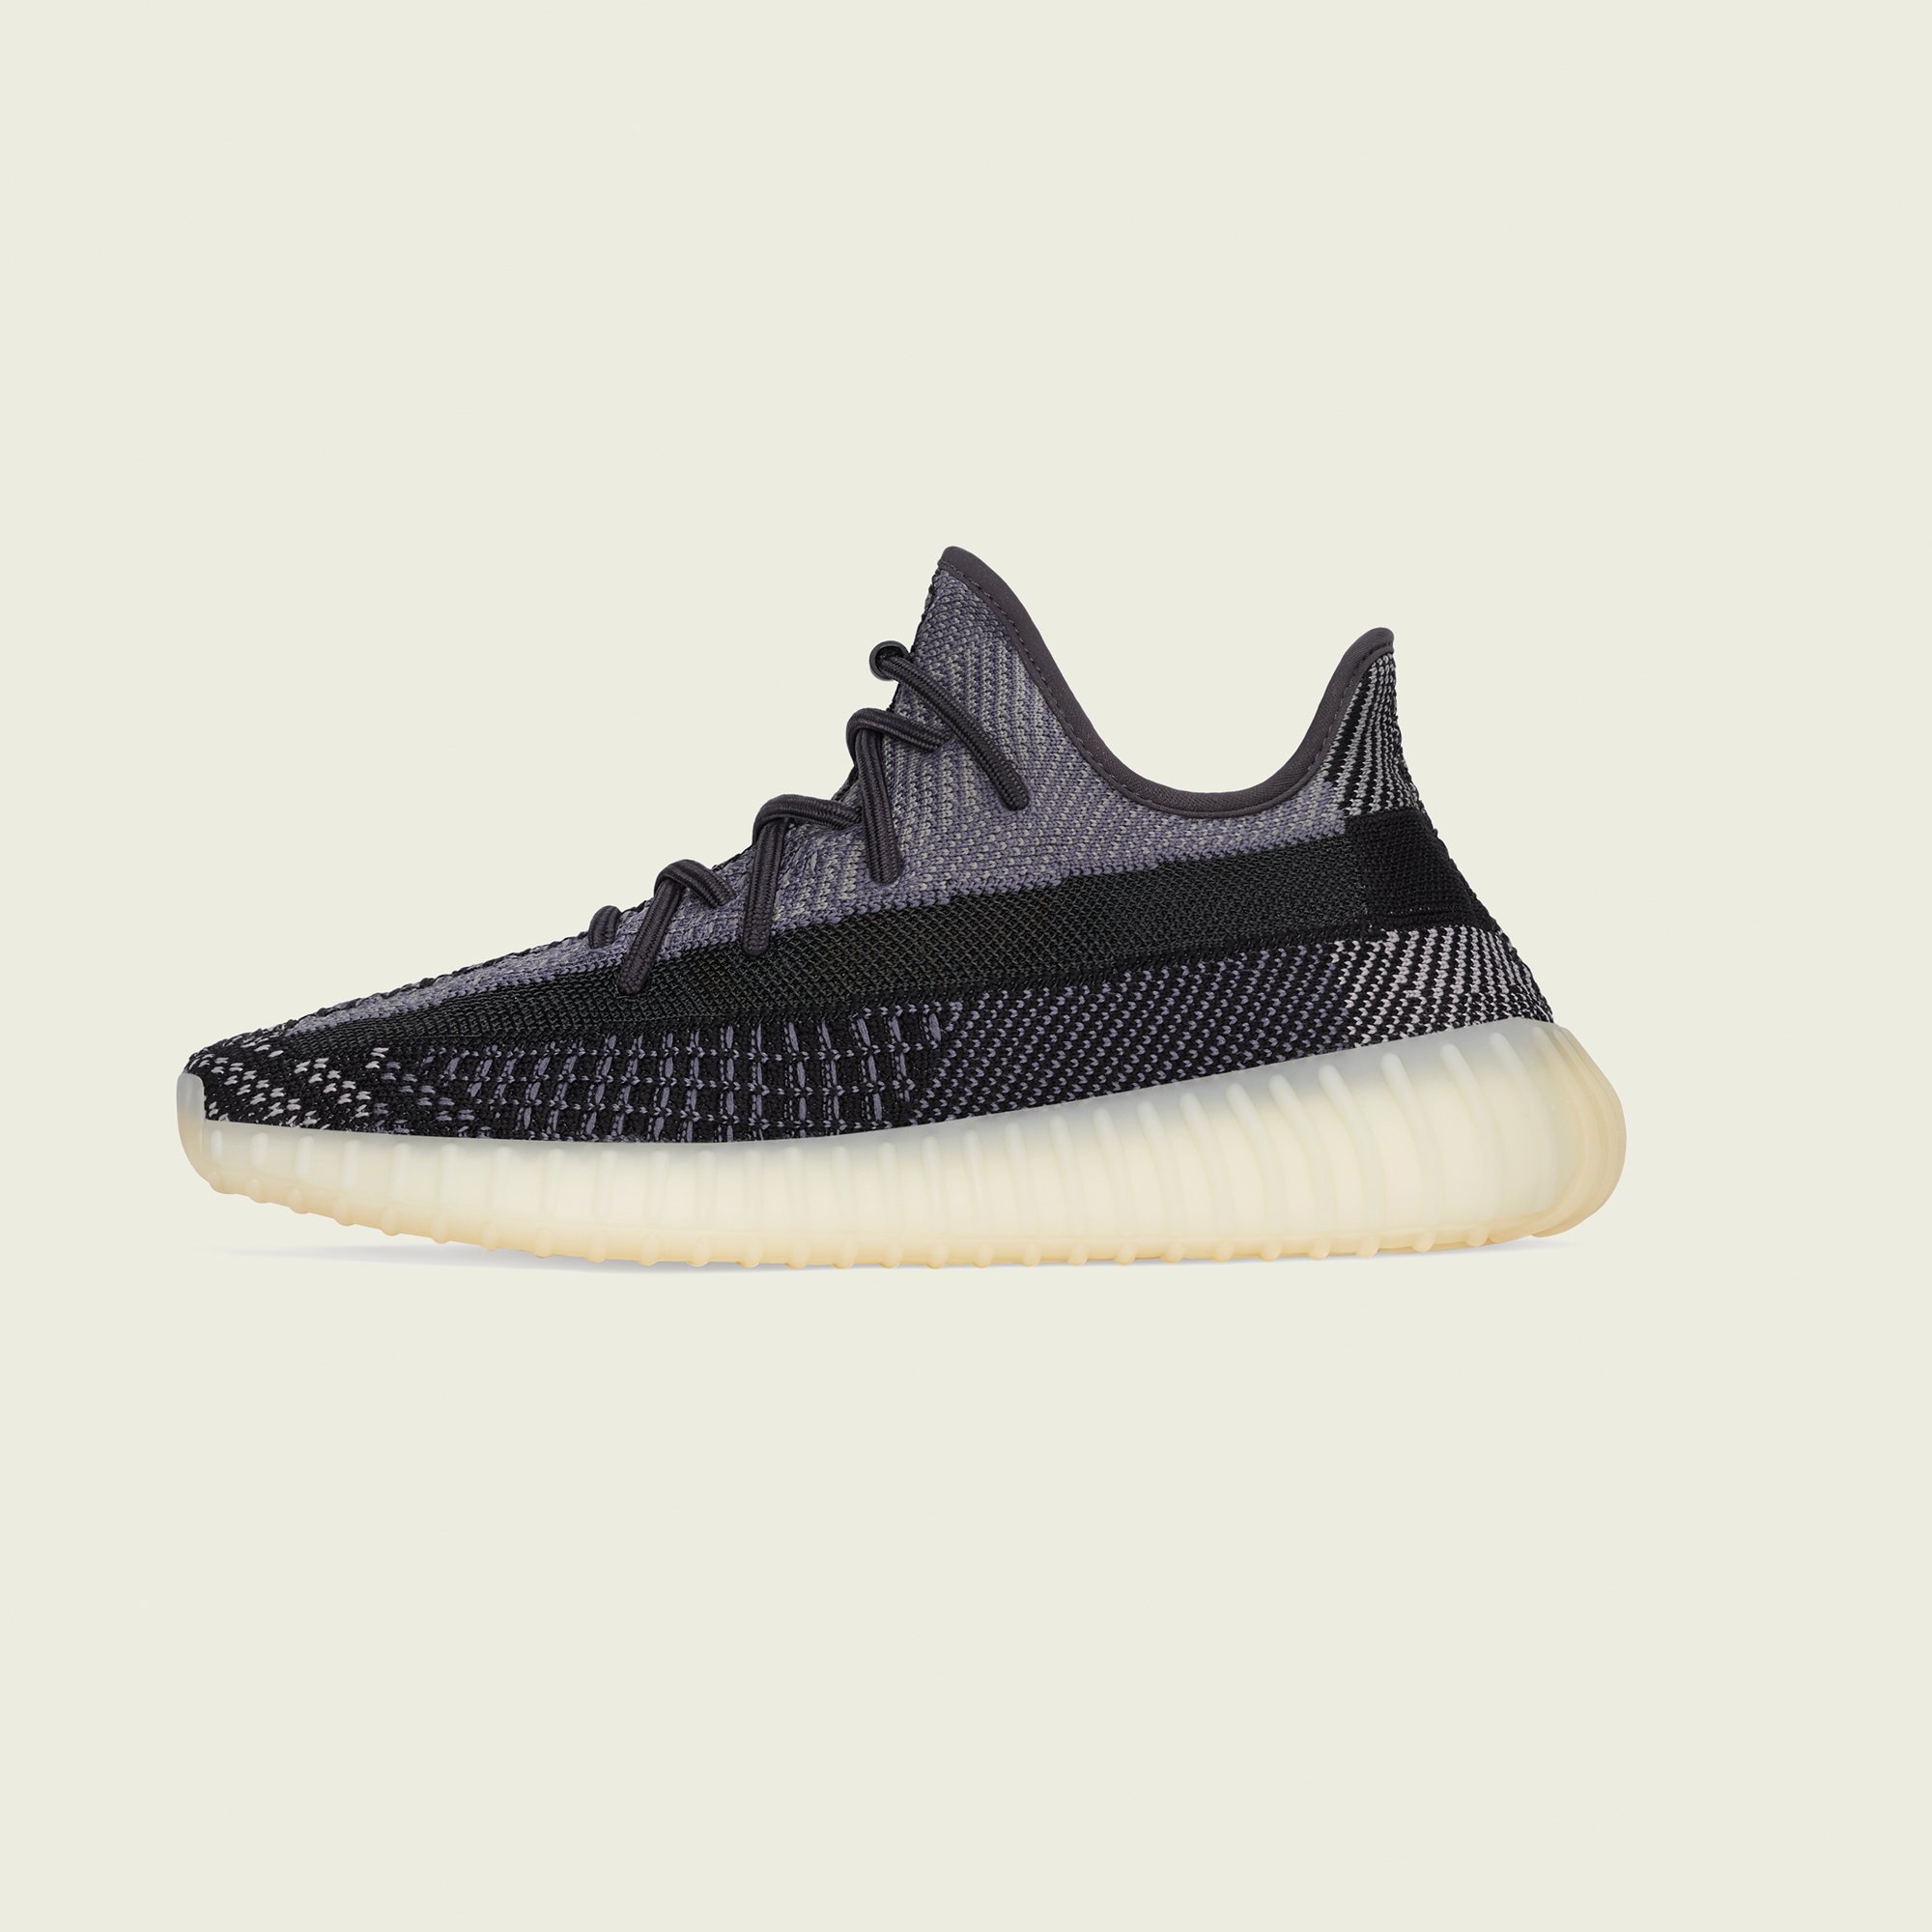 Where To Buy The Adidas Yeezy Boost 350 V2 “Carbon/Asriel”